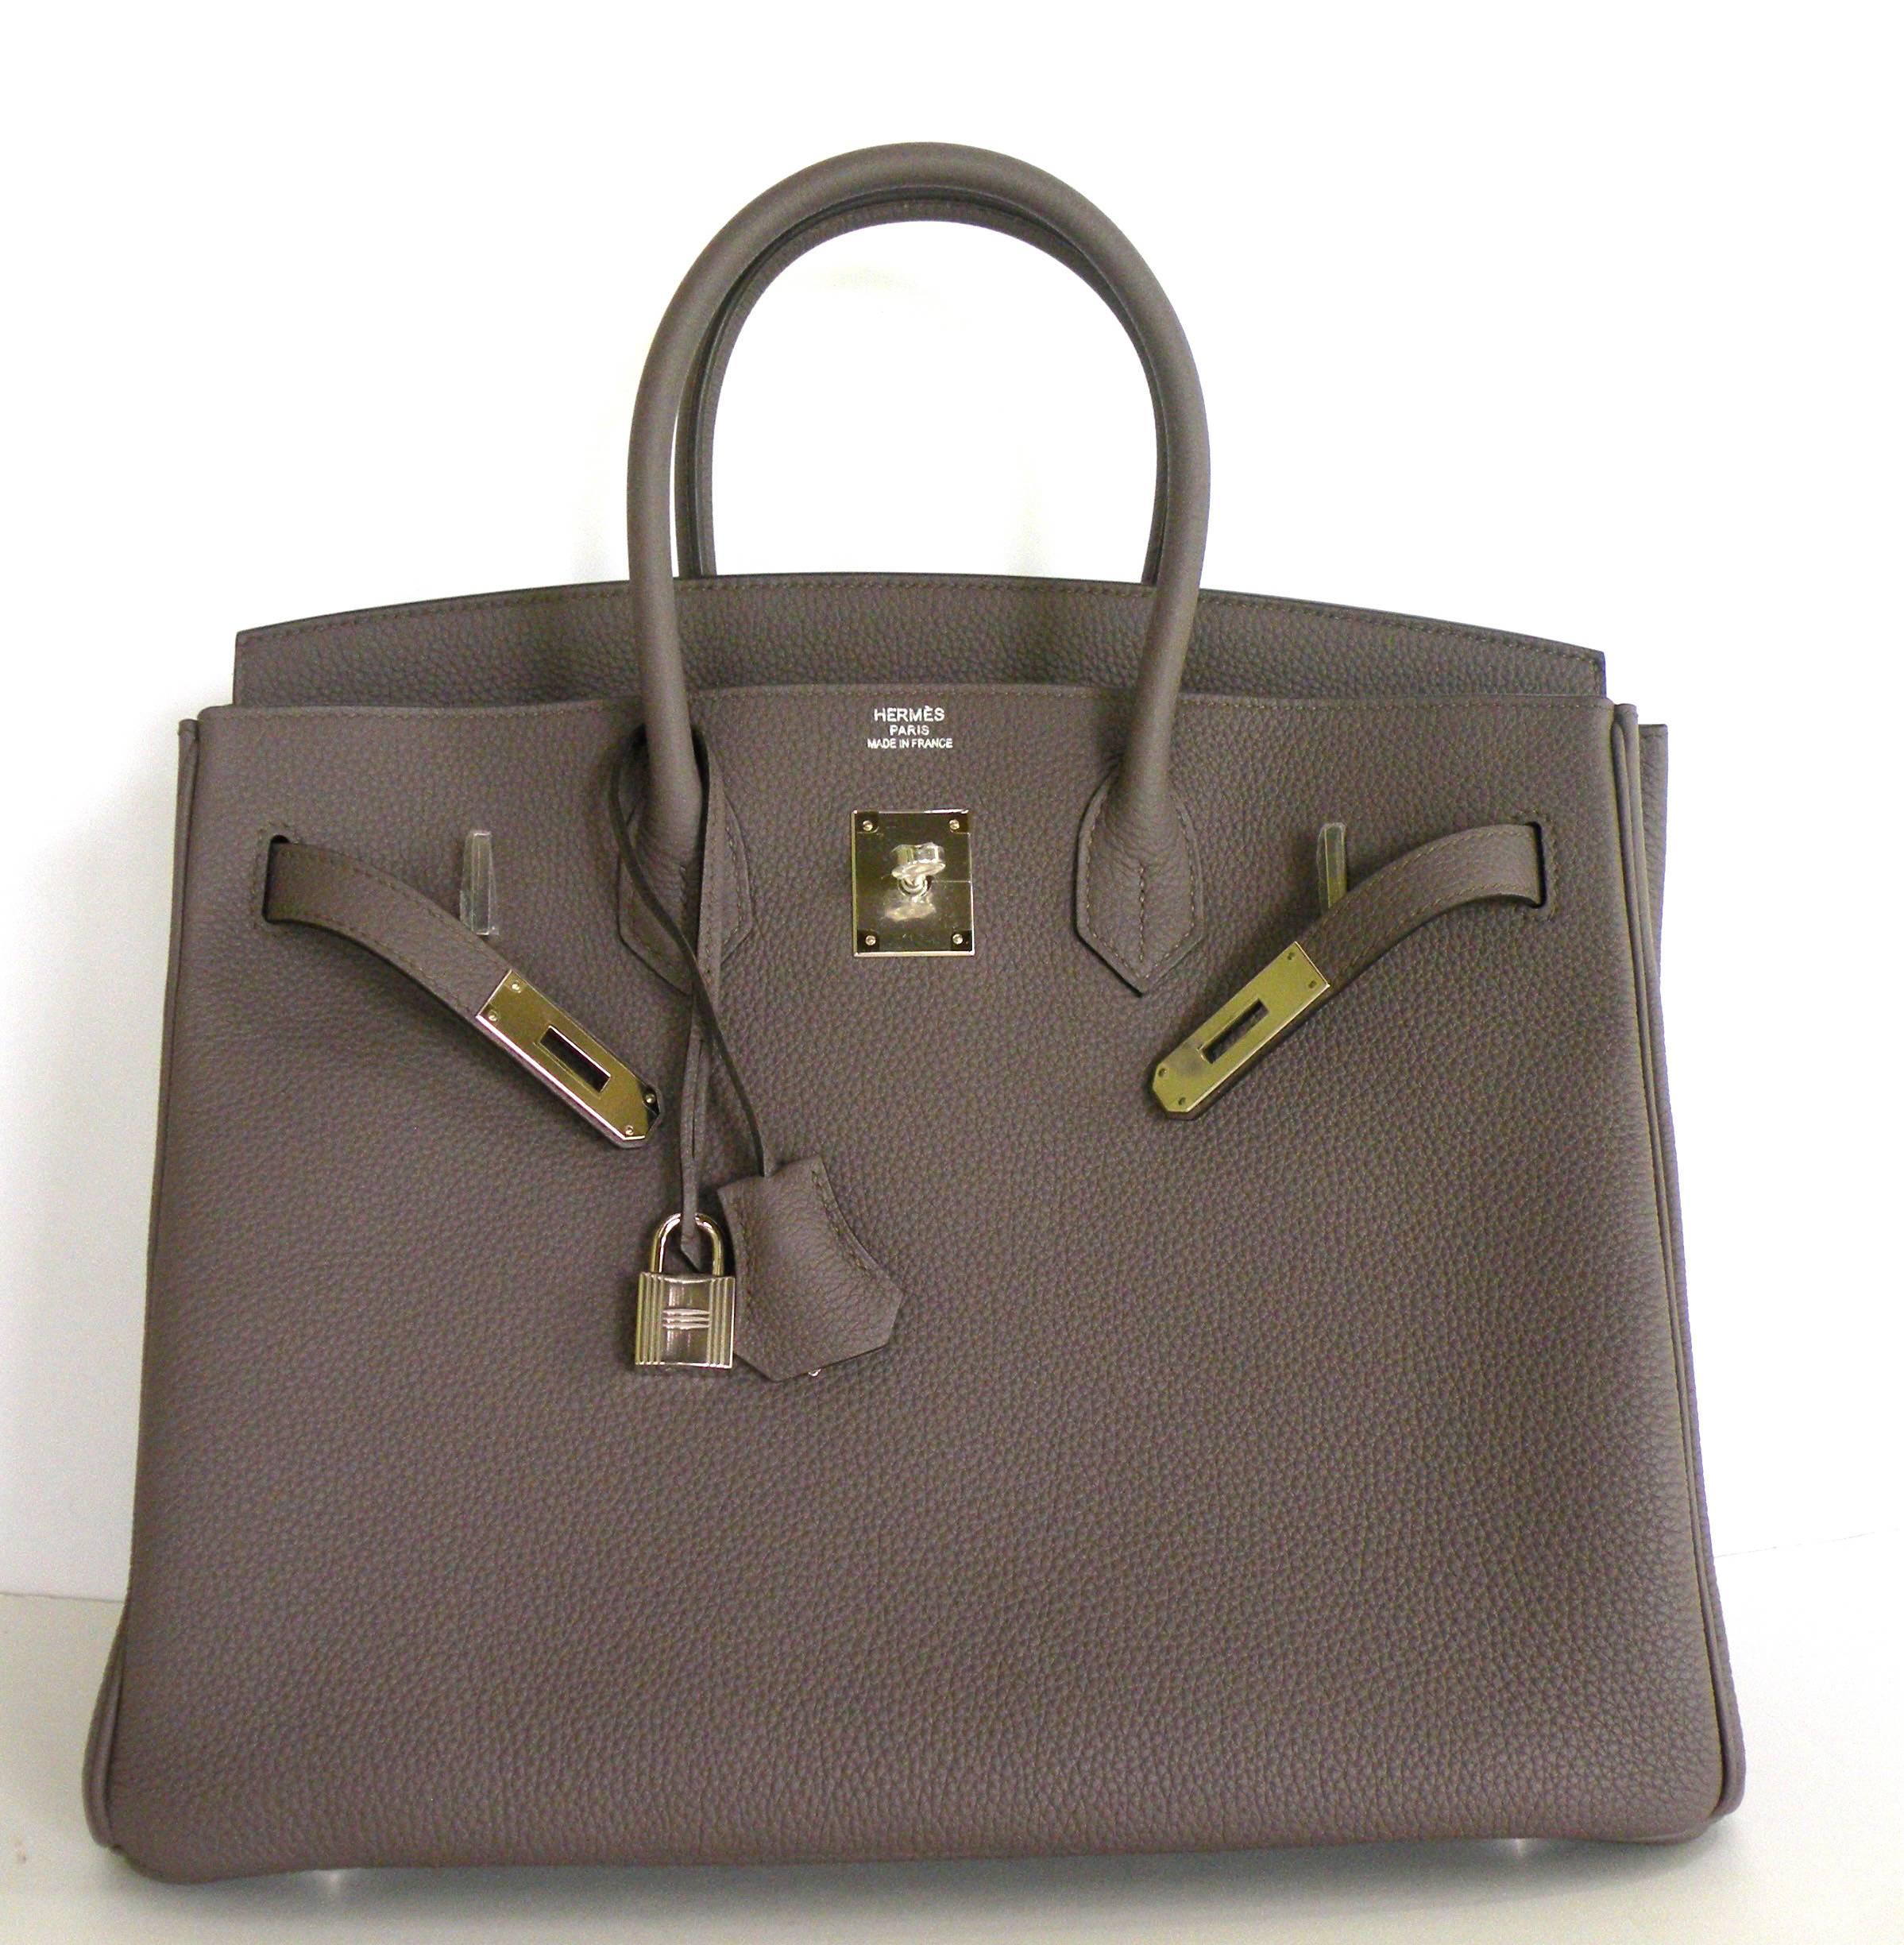 Hermes Birkin 35cm Bag Etain Grey Togo Palladium A 2017 In New Condition For Sale In West Chester, PA